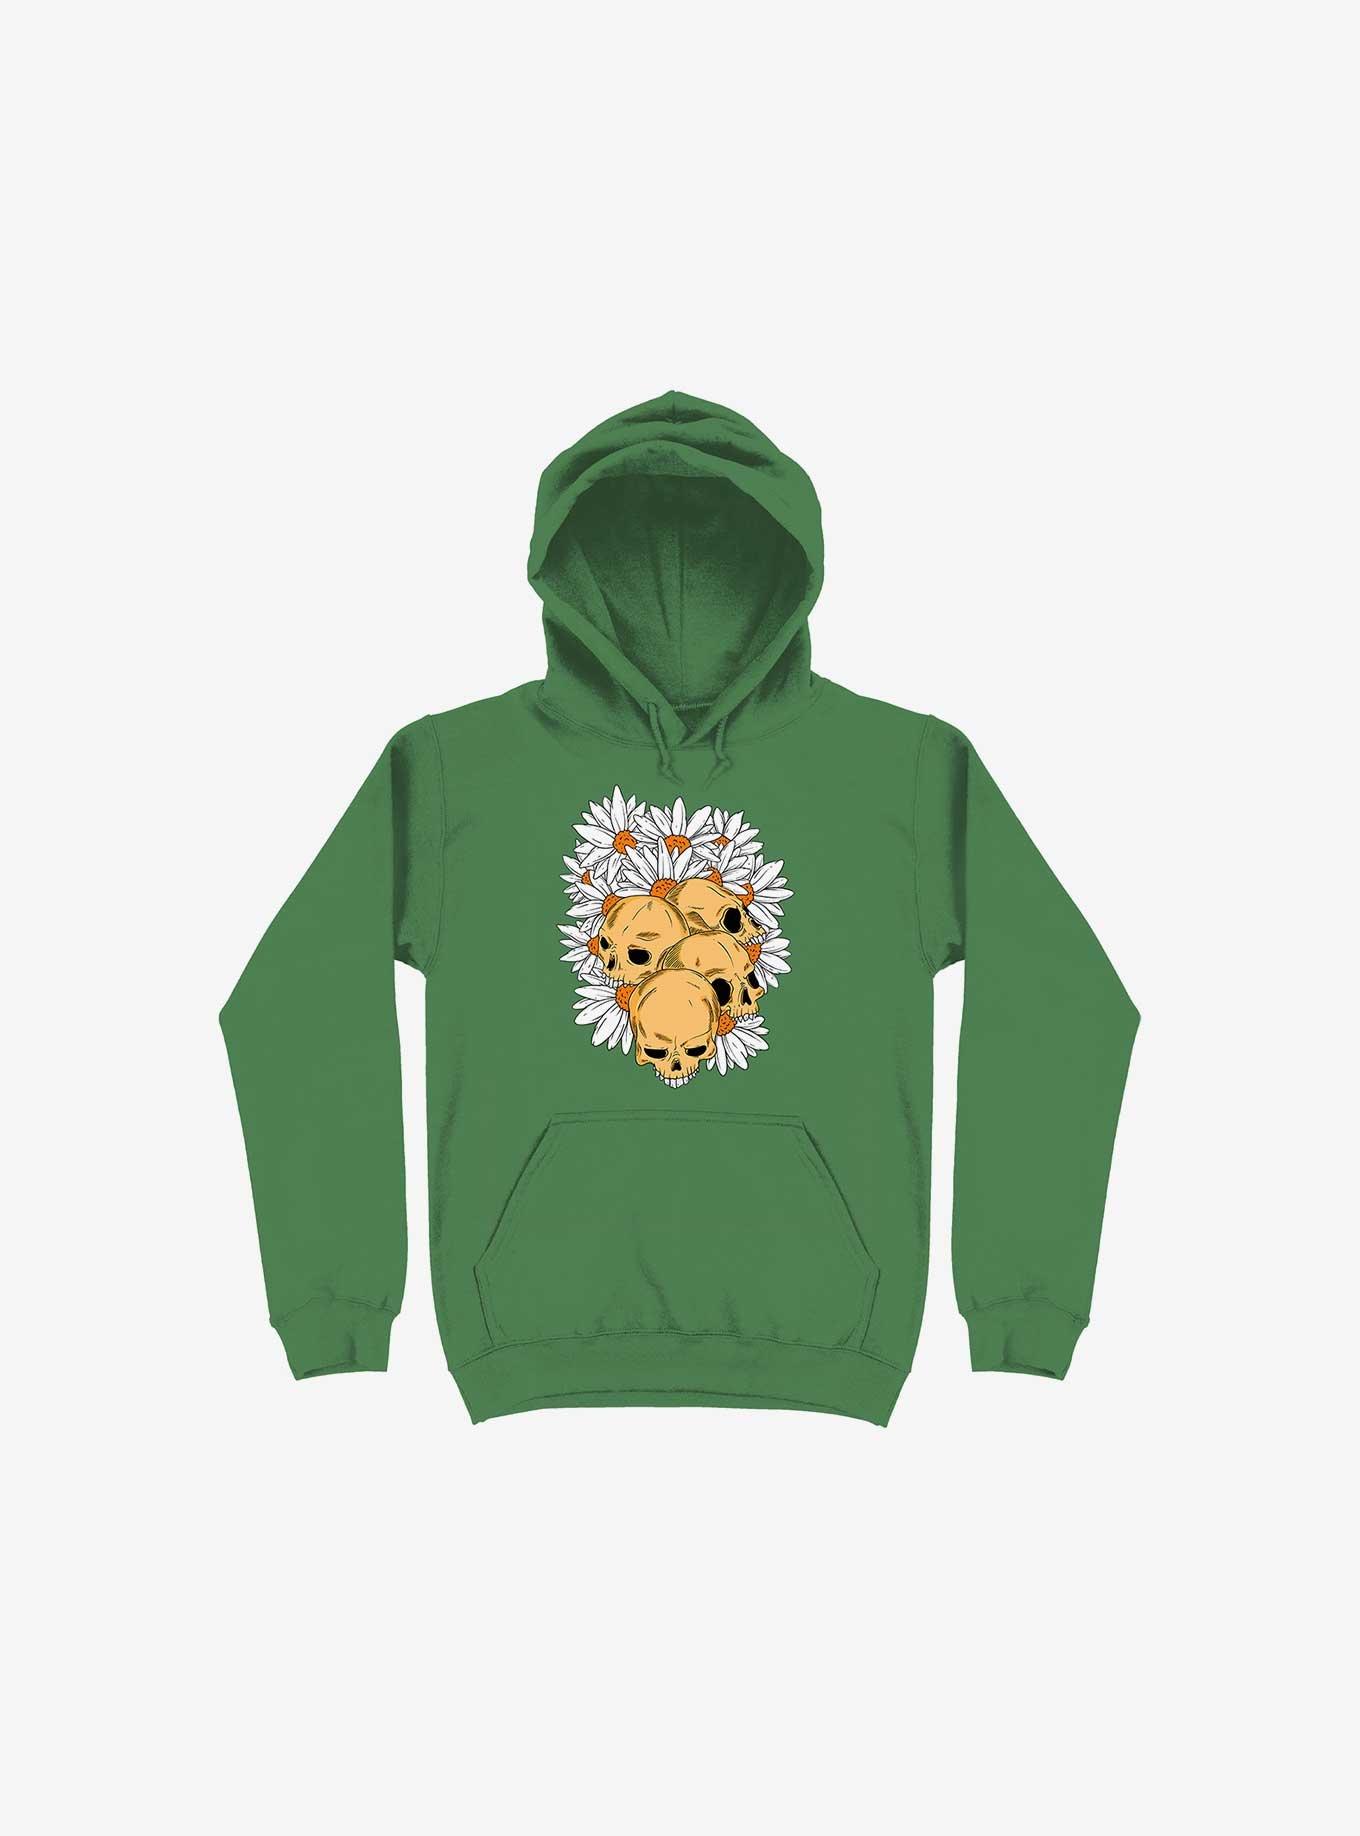 Skull Have Chance Kelly Green Hoodie, KELLY GREEN, hi-res